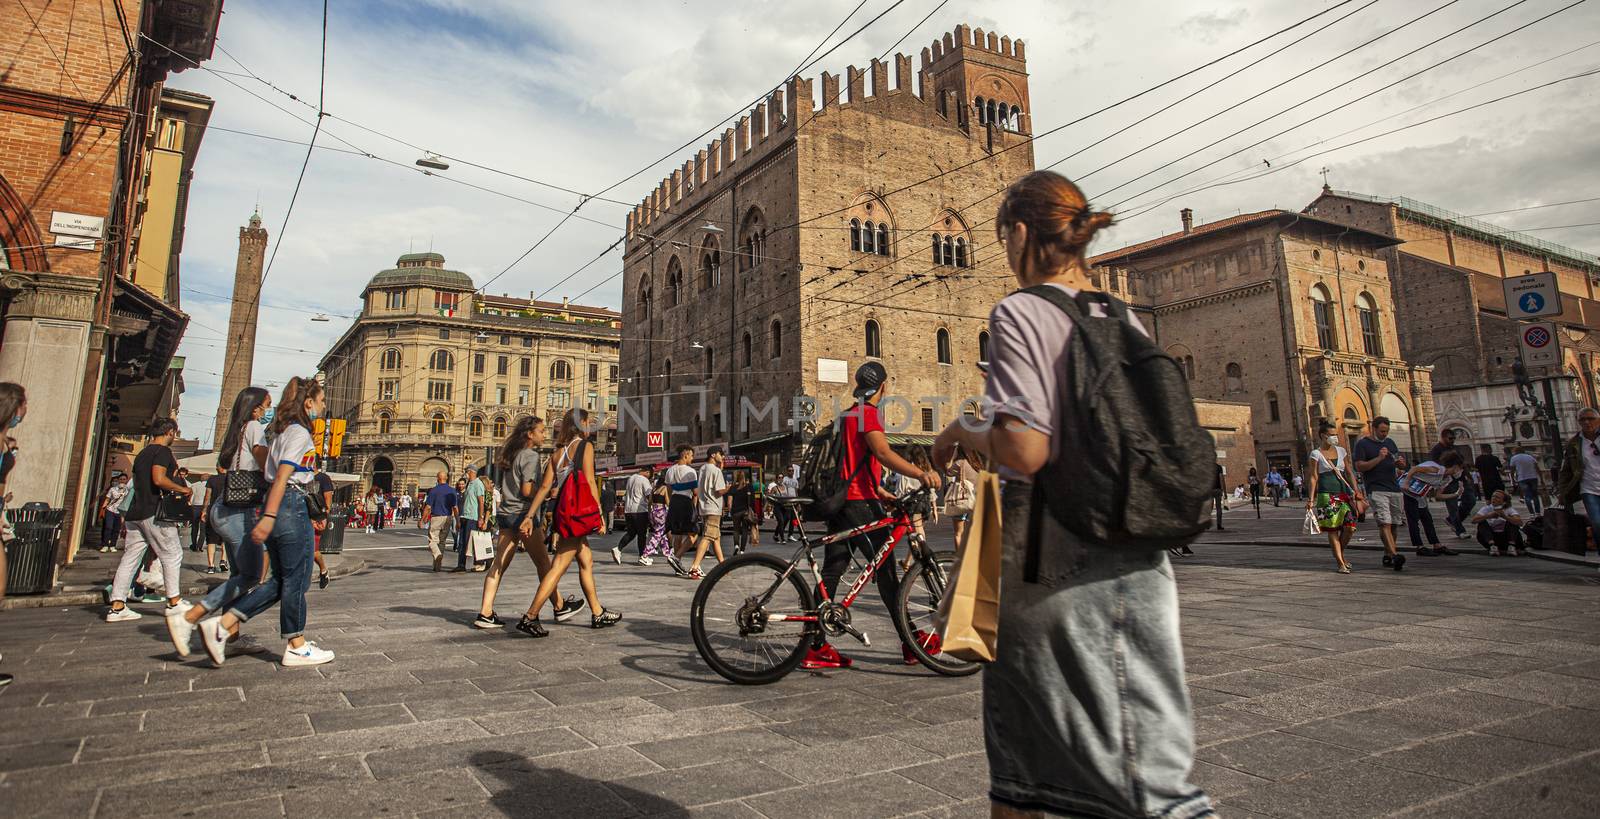 BOLOGNA, ITALY 17 JUNE 2020: Palazzo Re Enzo: a famous historic building in Bologna, Italy with people walking in the square